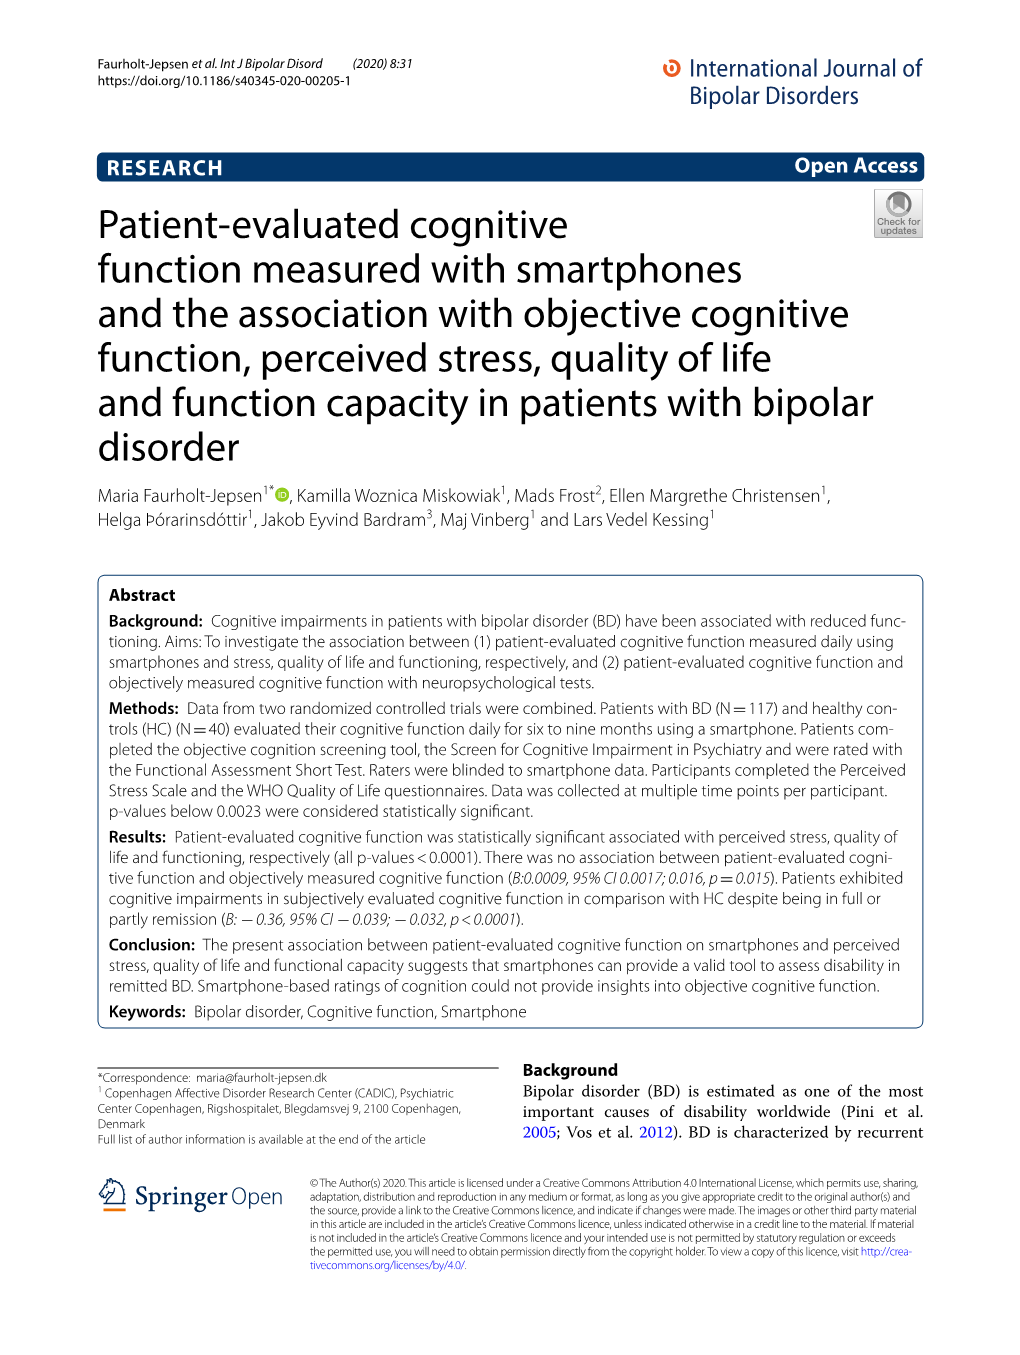 Patient-Evaluated Cognitive Function Measured with Smartphones And